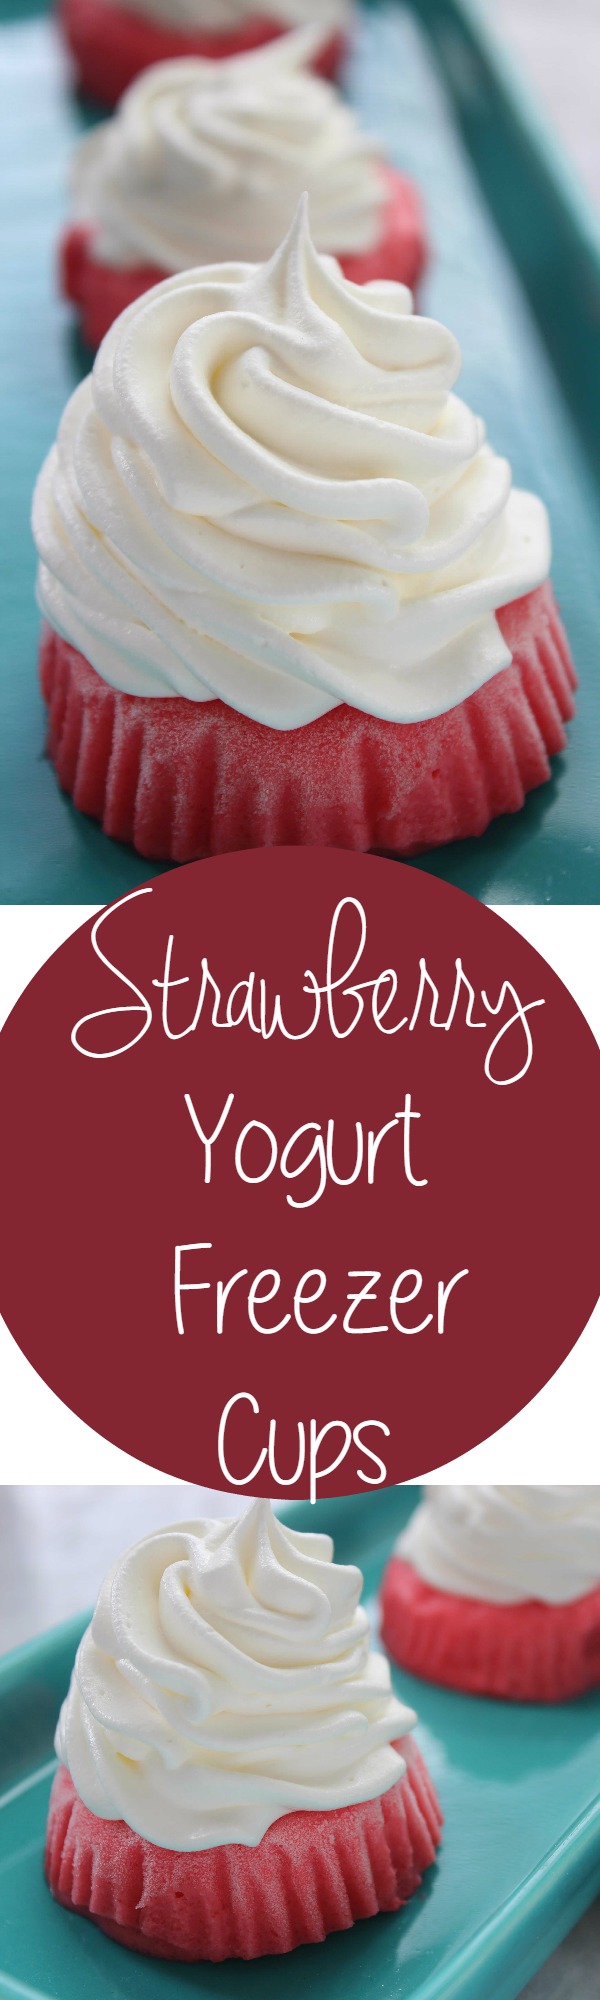 DIY Healthy Strawberry Yogurt Freezer Cups recipe. Just two ingredients in this healthy and delicious snack! Very refreshing for summer or as a back to school snack!